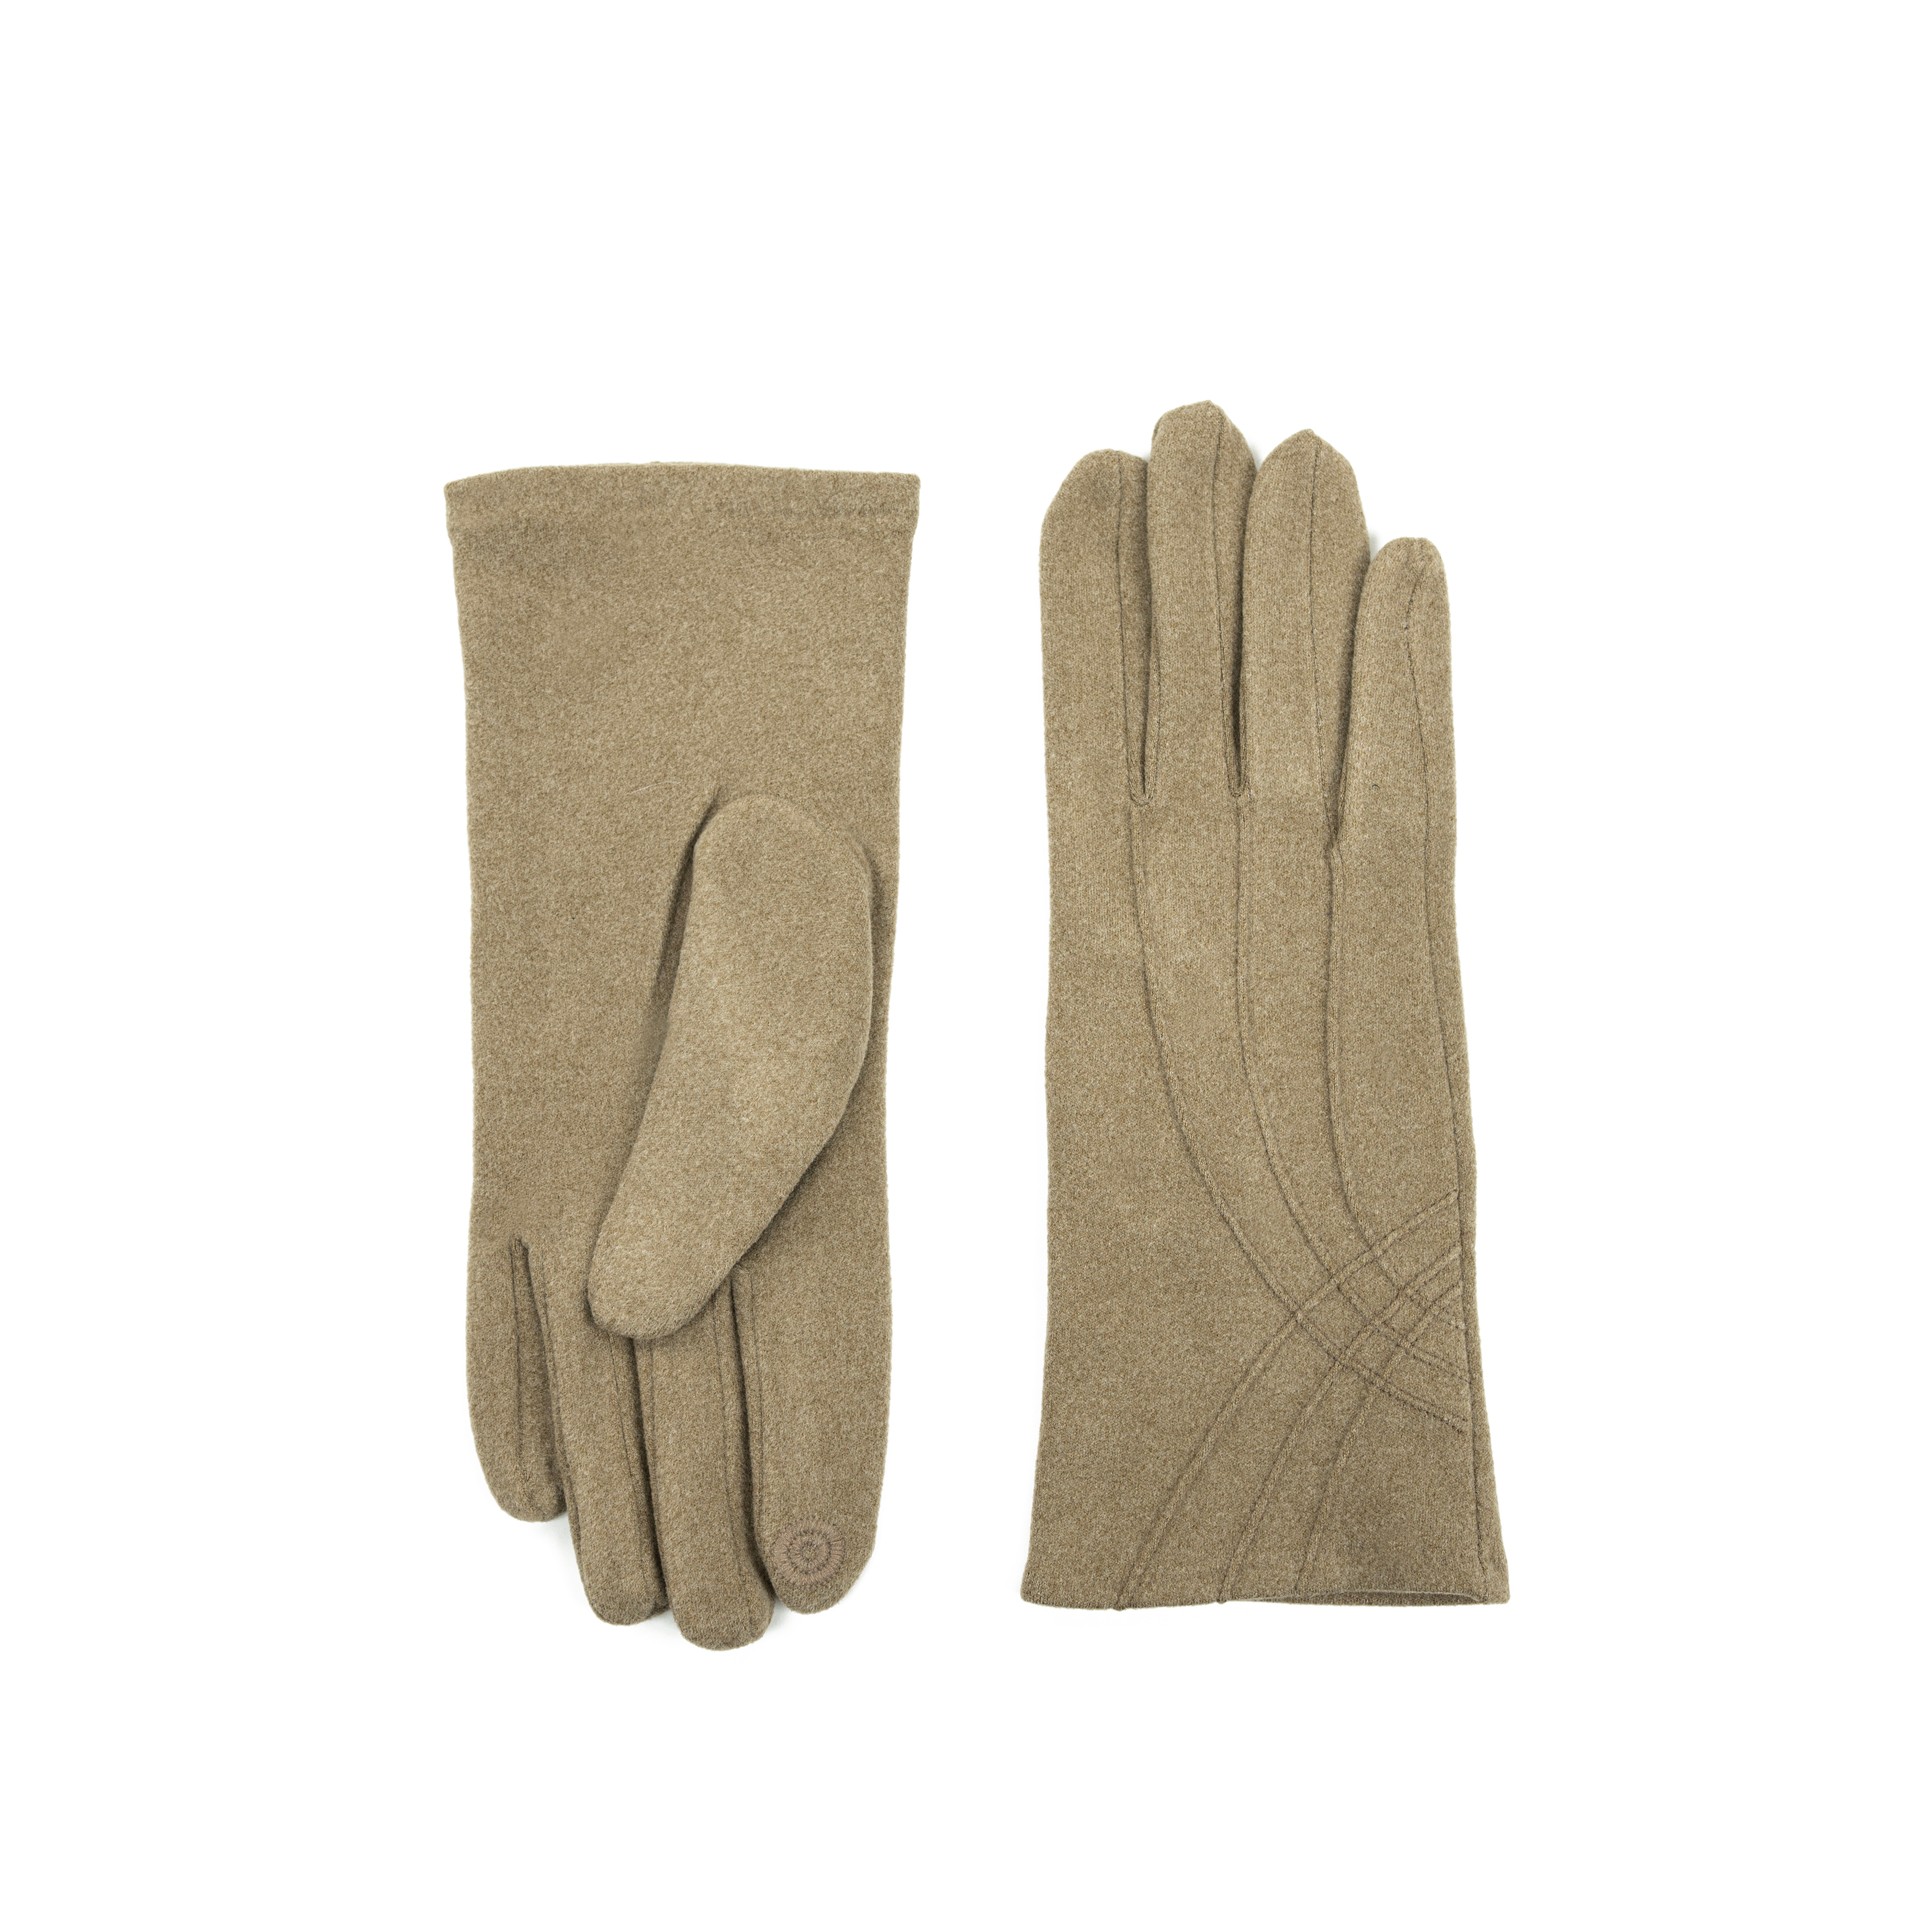 Art Of Polo Woman's Gloves rk23314-2